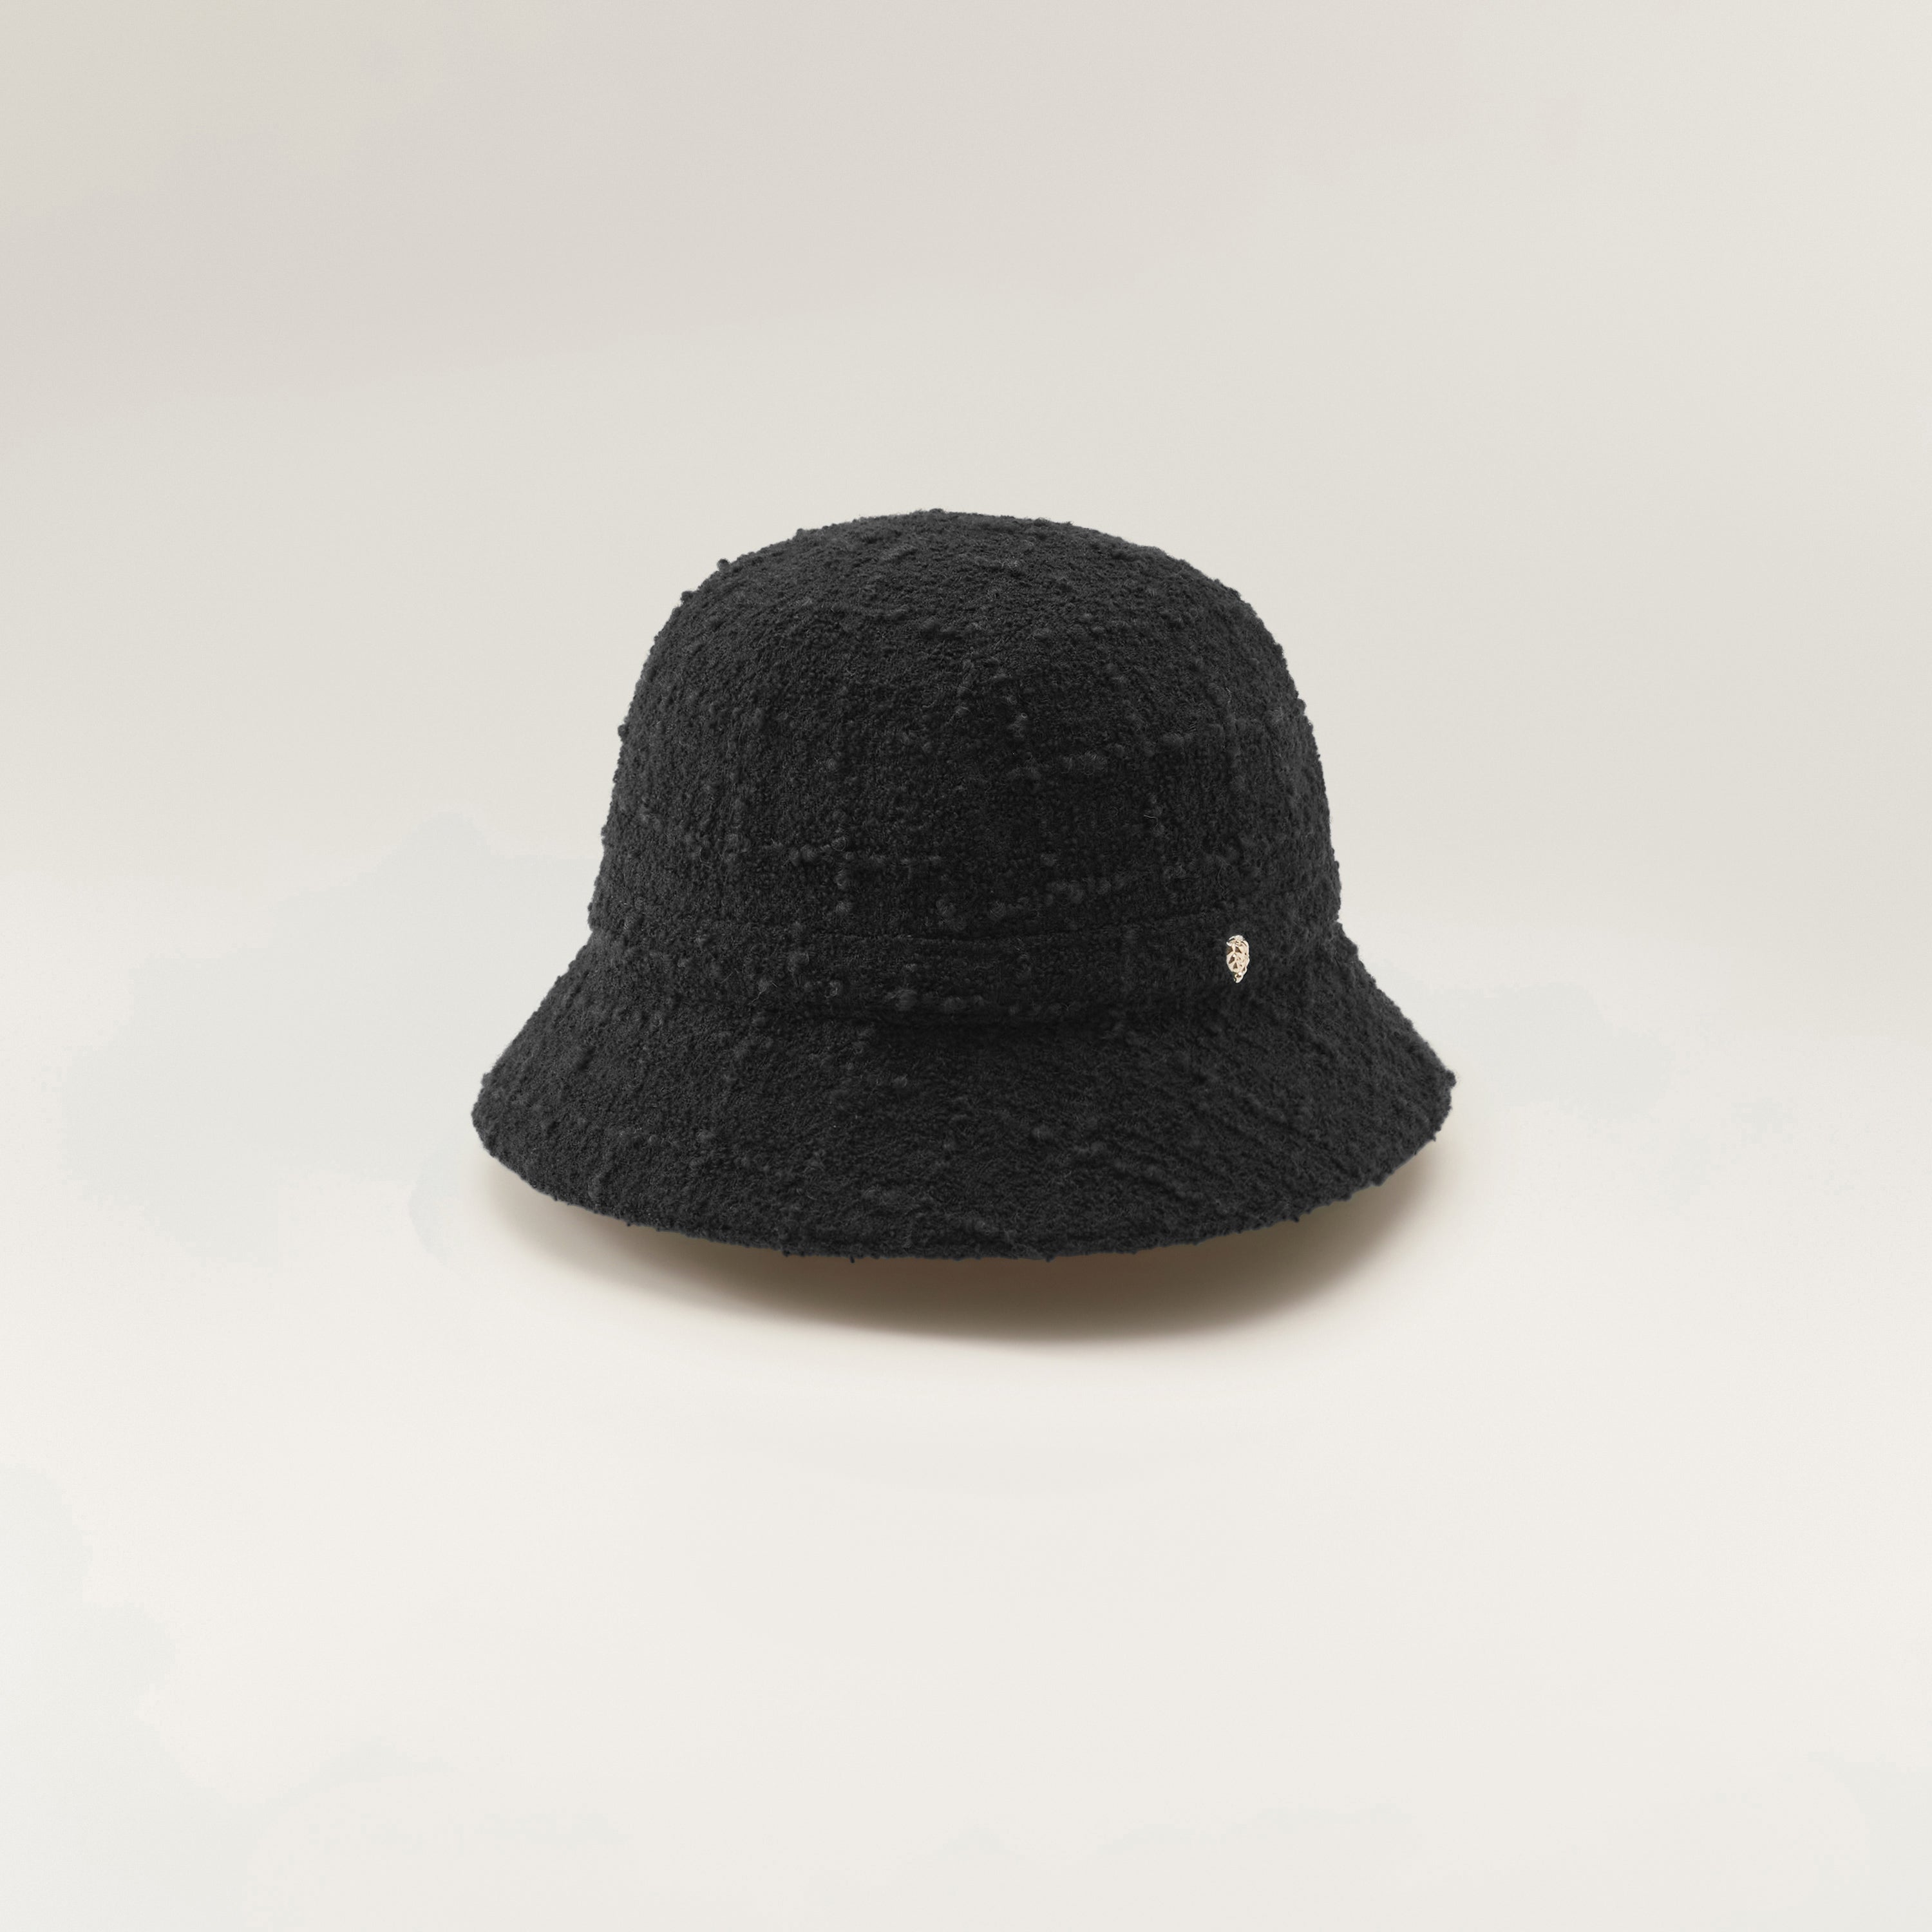 LOUIS VUITTON Cashmere knitted bucket hat Cashmere / Leather Navy x Black